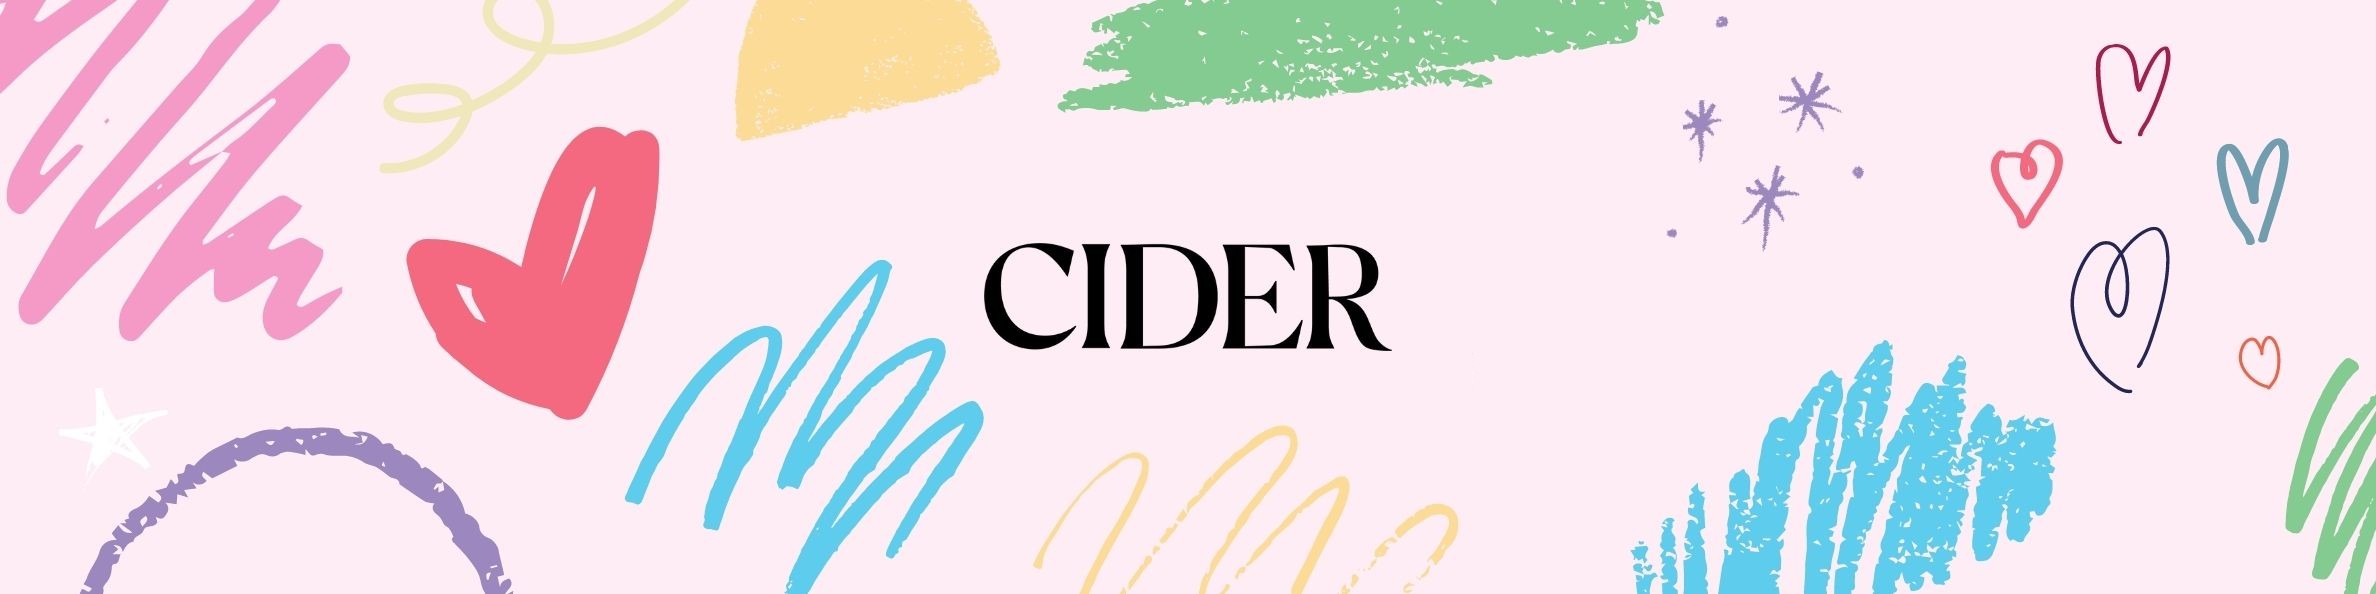 Review of Cider Clothing: A New Brand with a Classic Look